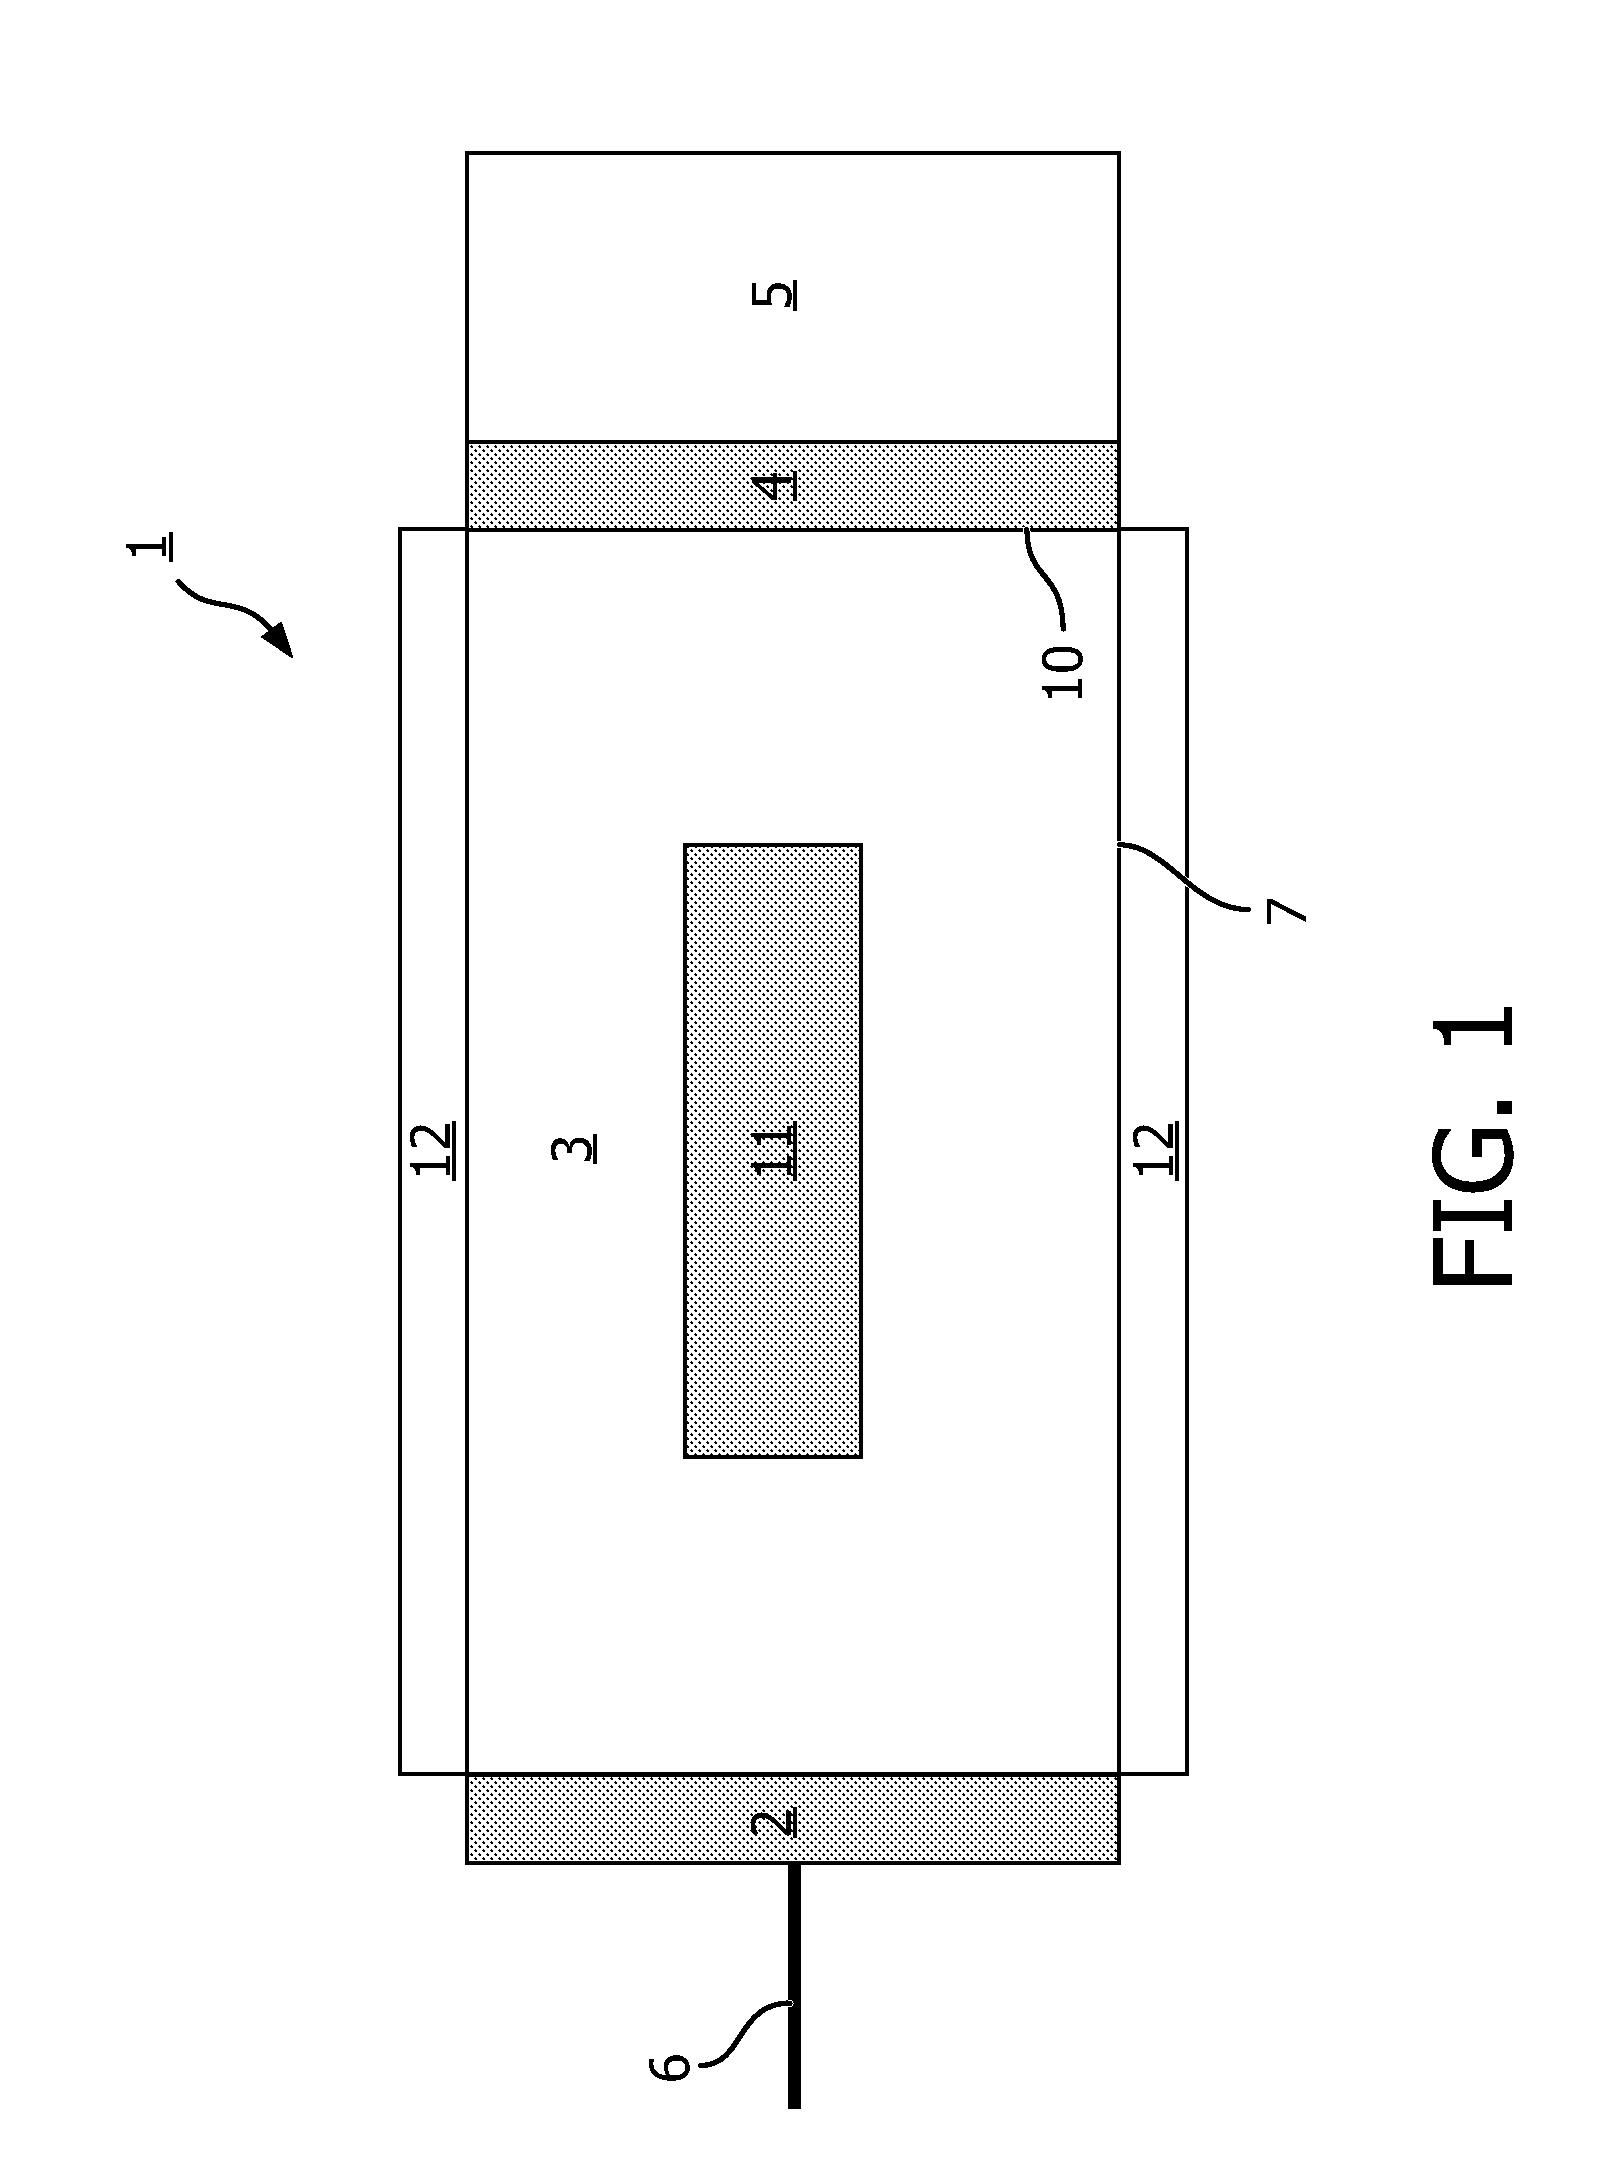 Method for generating nitric oxide